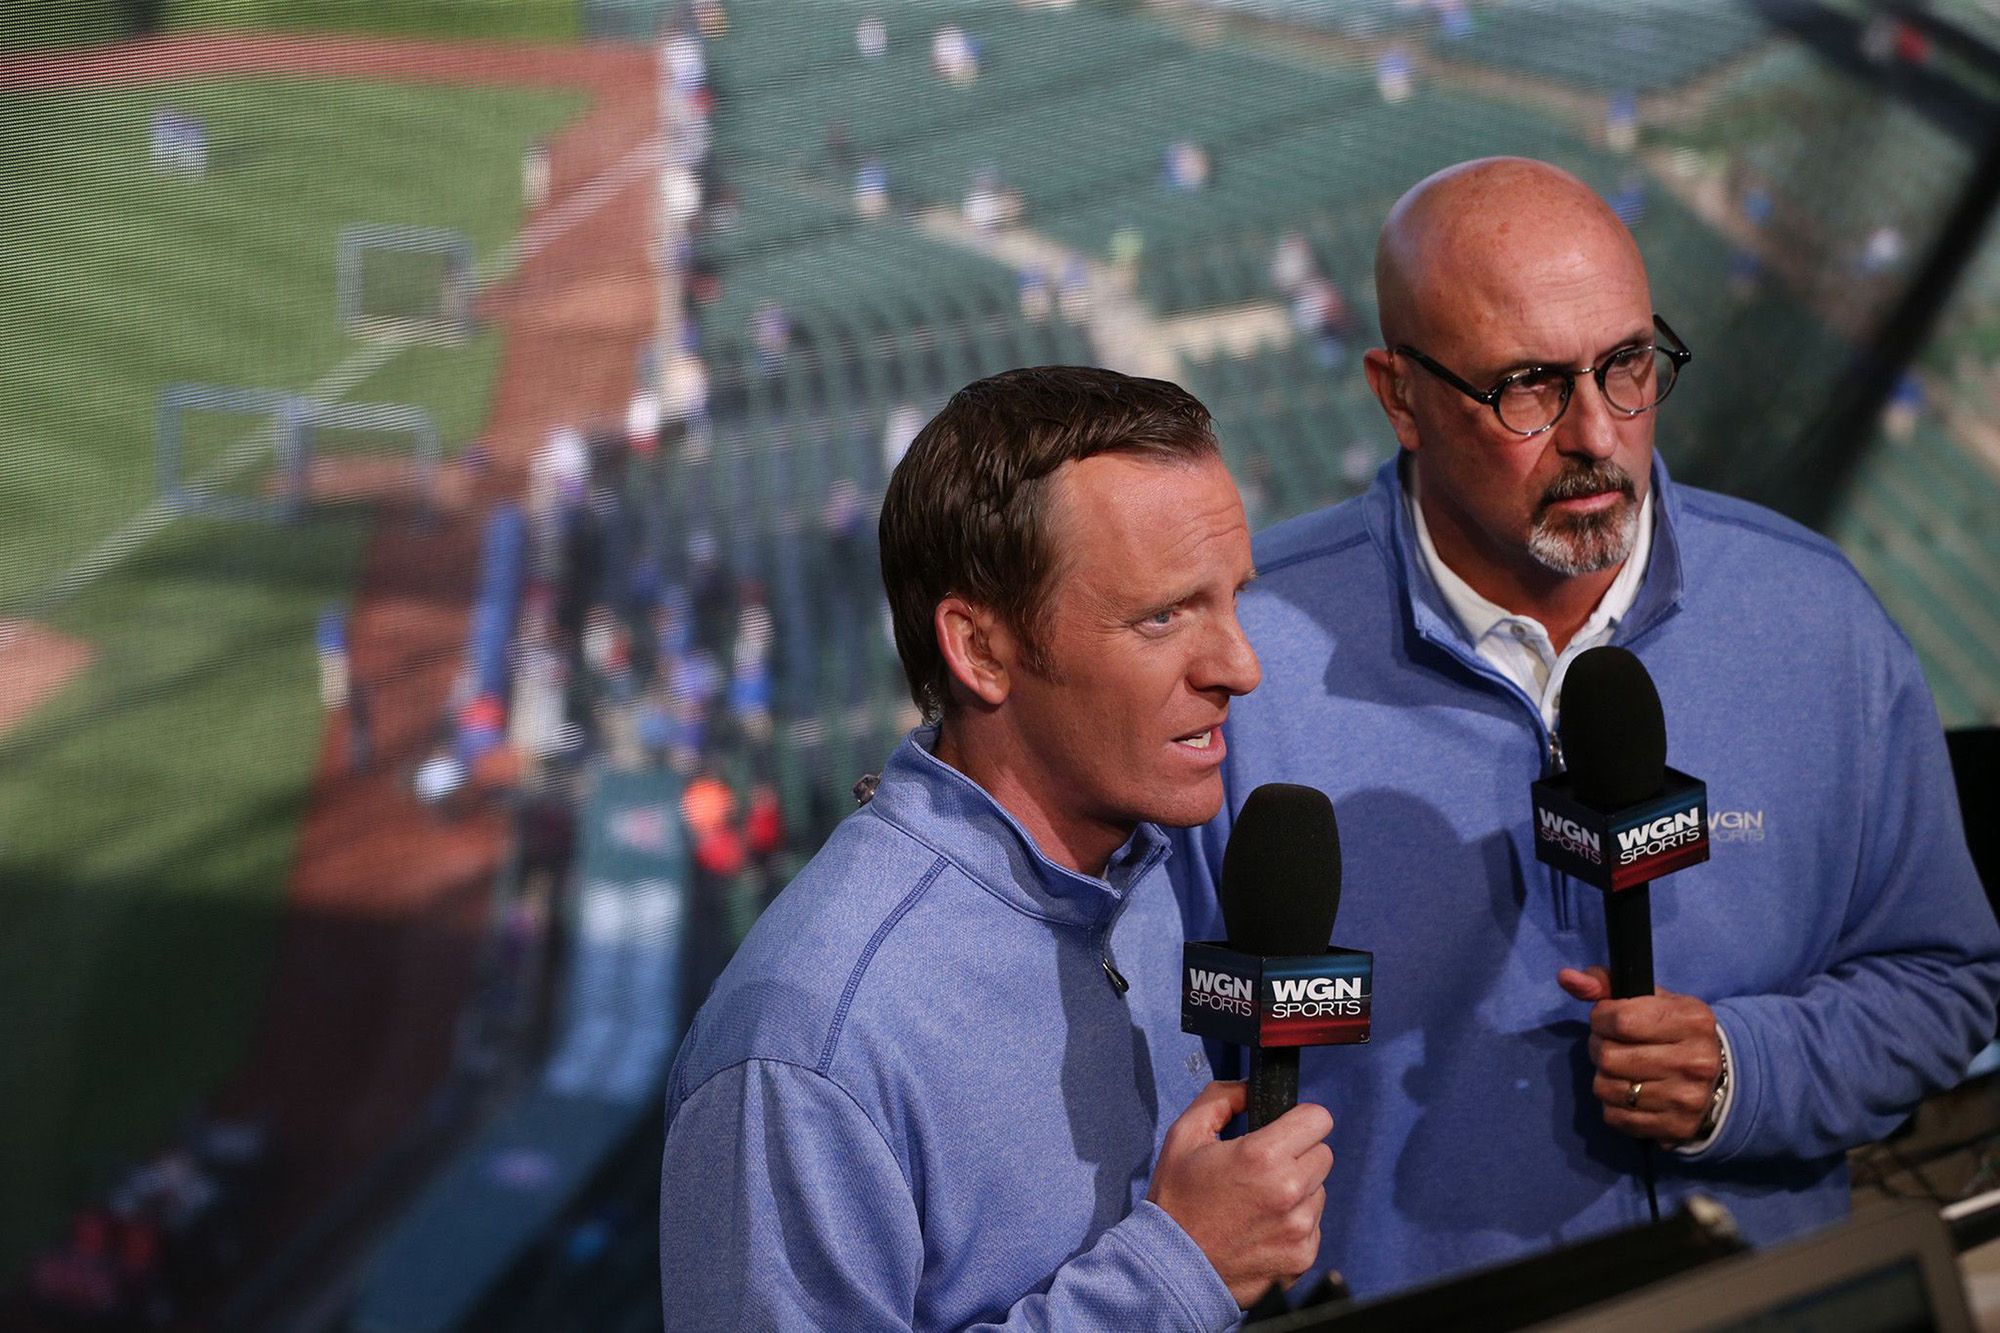 Photo of two broadcasters in a baseball booth 